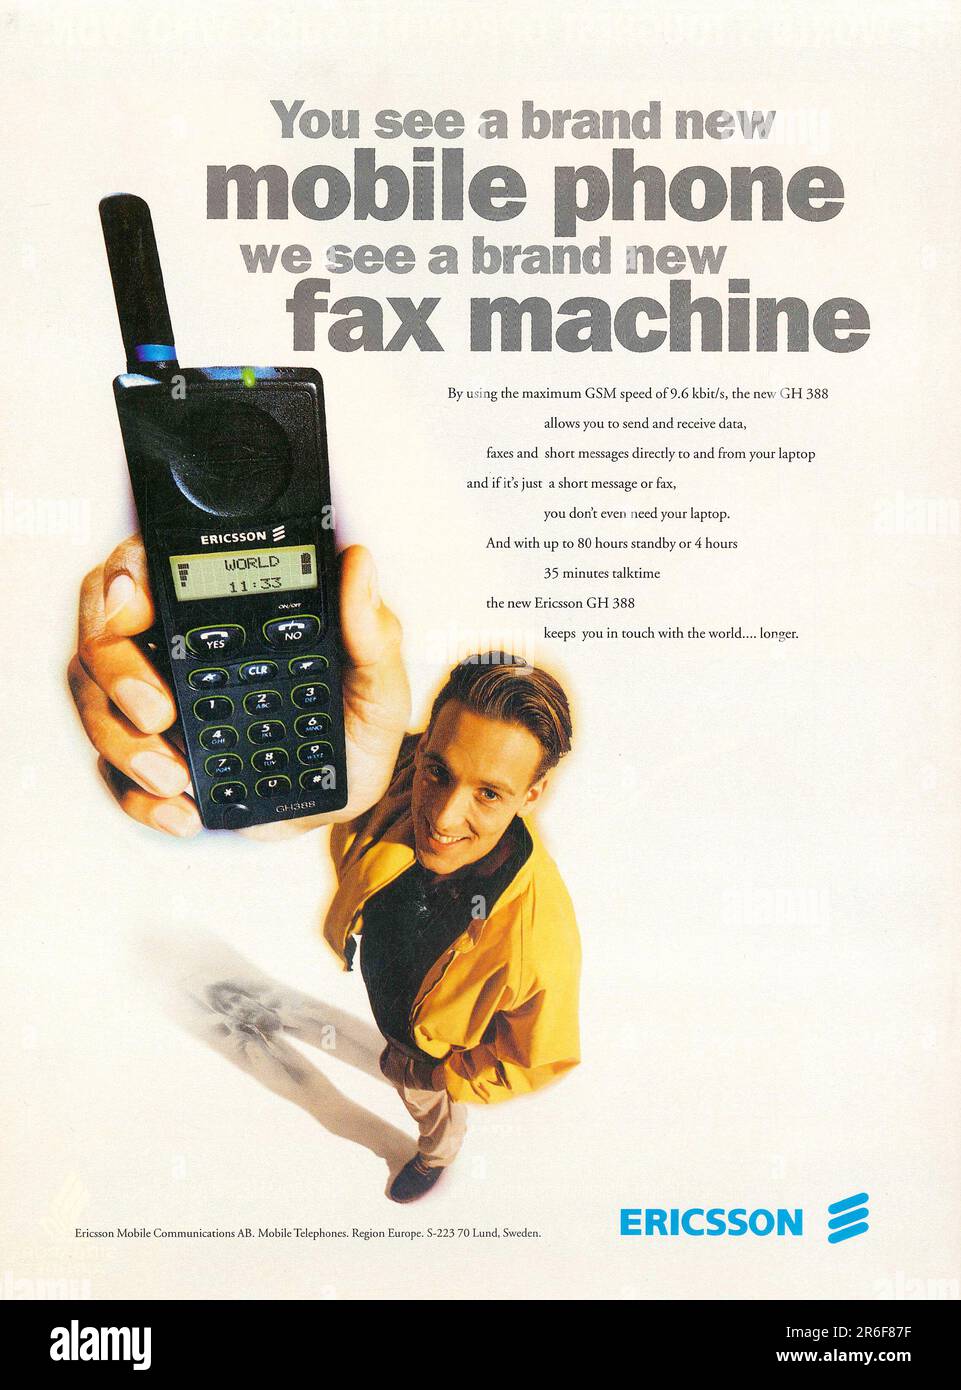 Ericsson GH 388 GSM mobile phone advert in a magazine 1996 Stock Photo